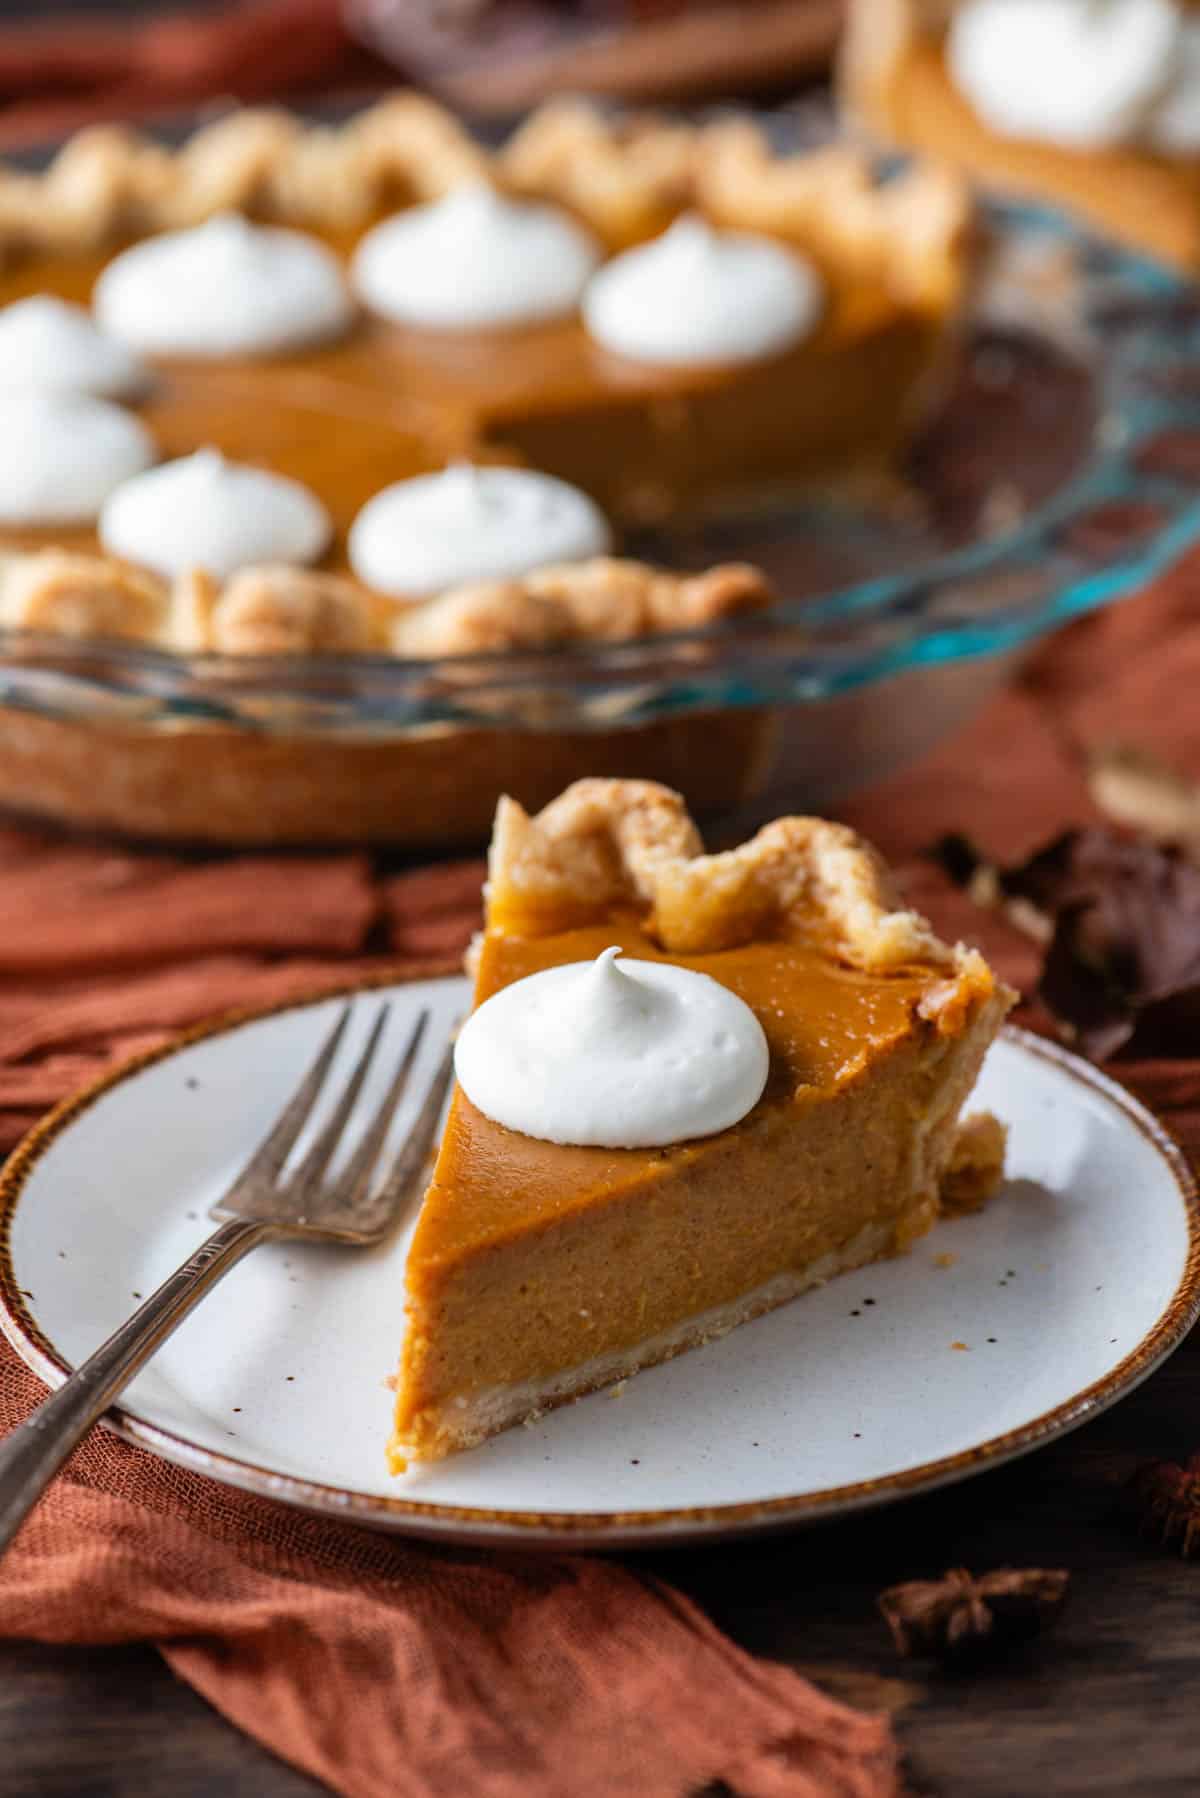 a slice of pumpkin pie on a plate topped with whipped cream with a fork sitting beside it on the plate, with the rest of the pie behind it in a glass pie dish, all sitting on a wood surface with a dark orange cloth